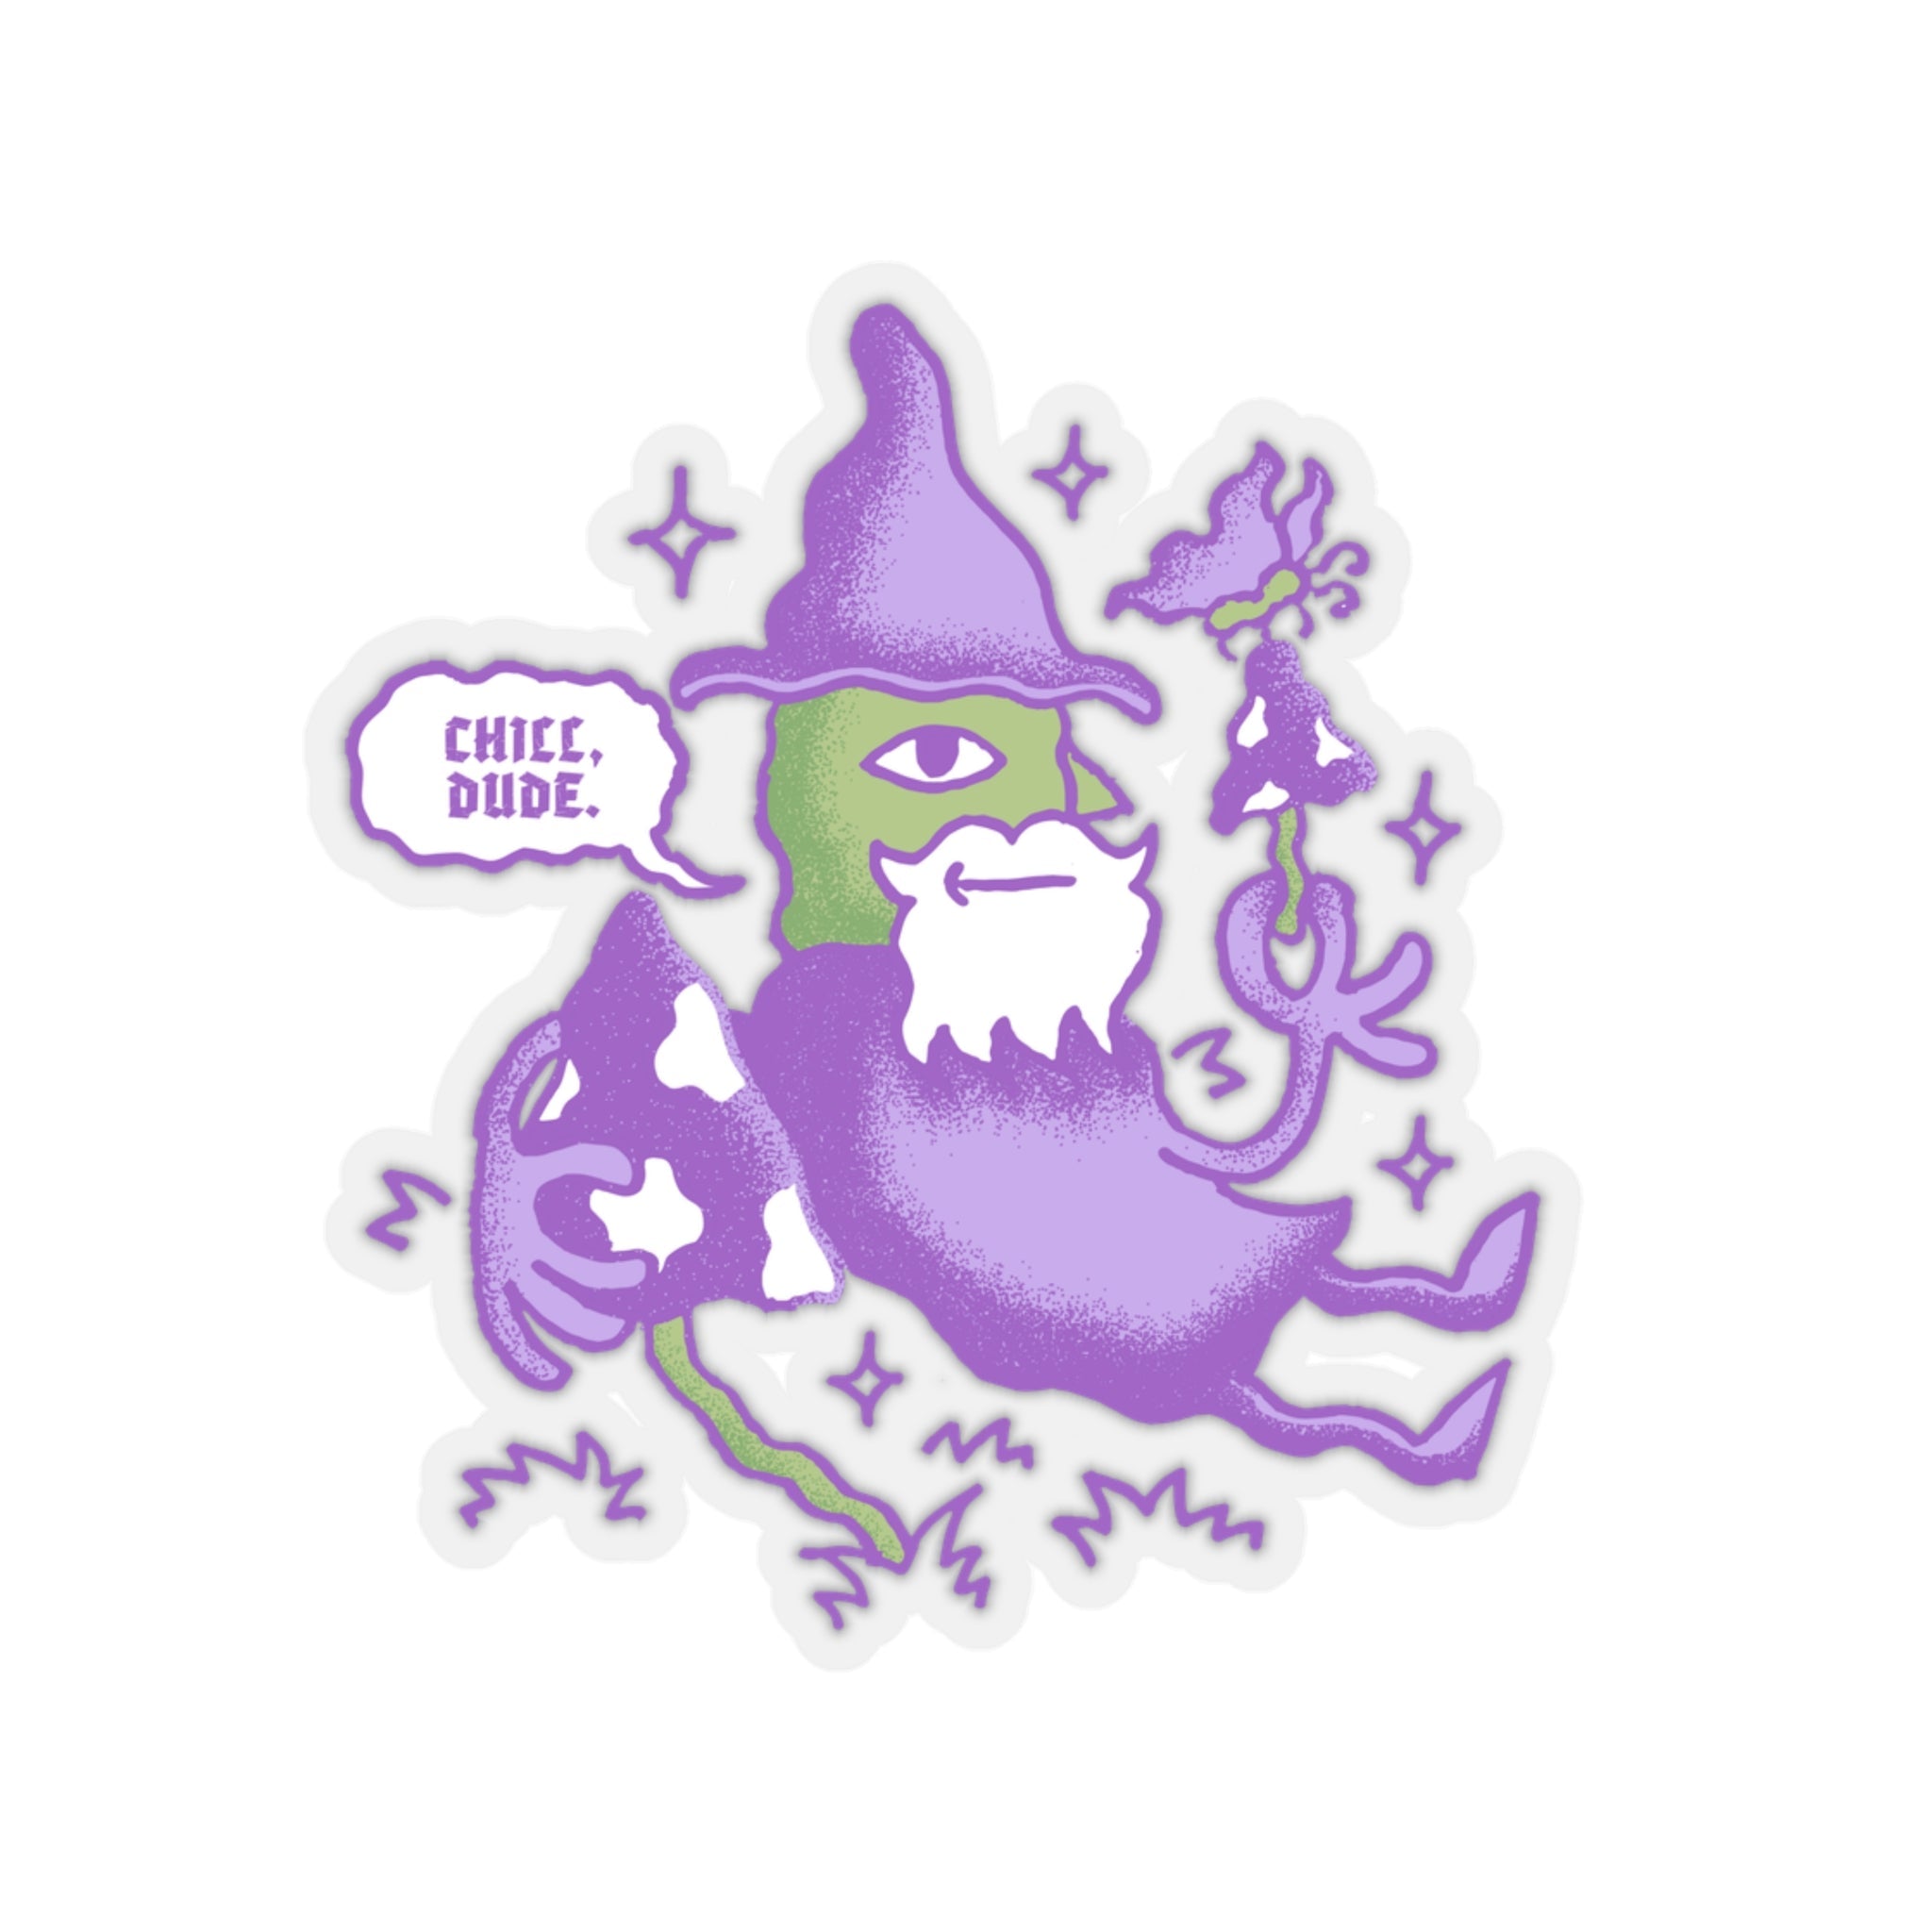 Chill, Dude | Kiss-Cut Sticker - Paper products - Ace of Gnomes - 67338427716751495014